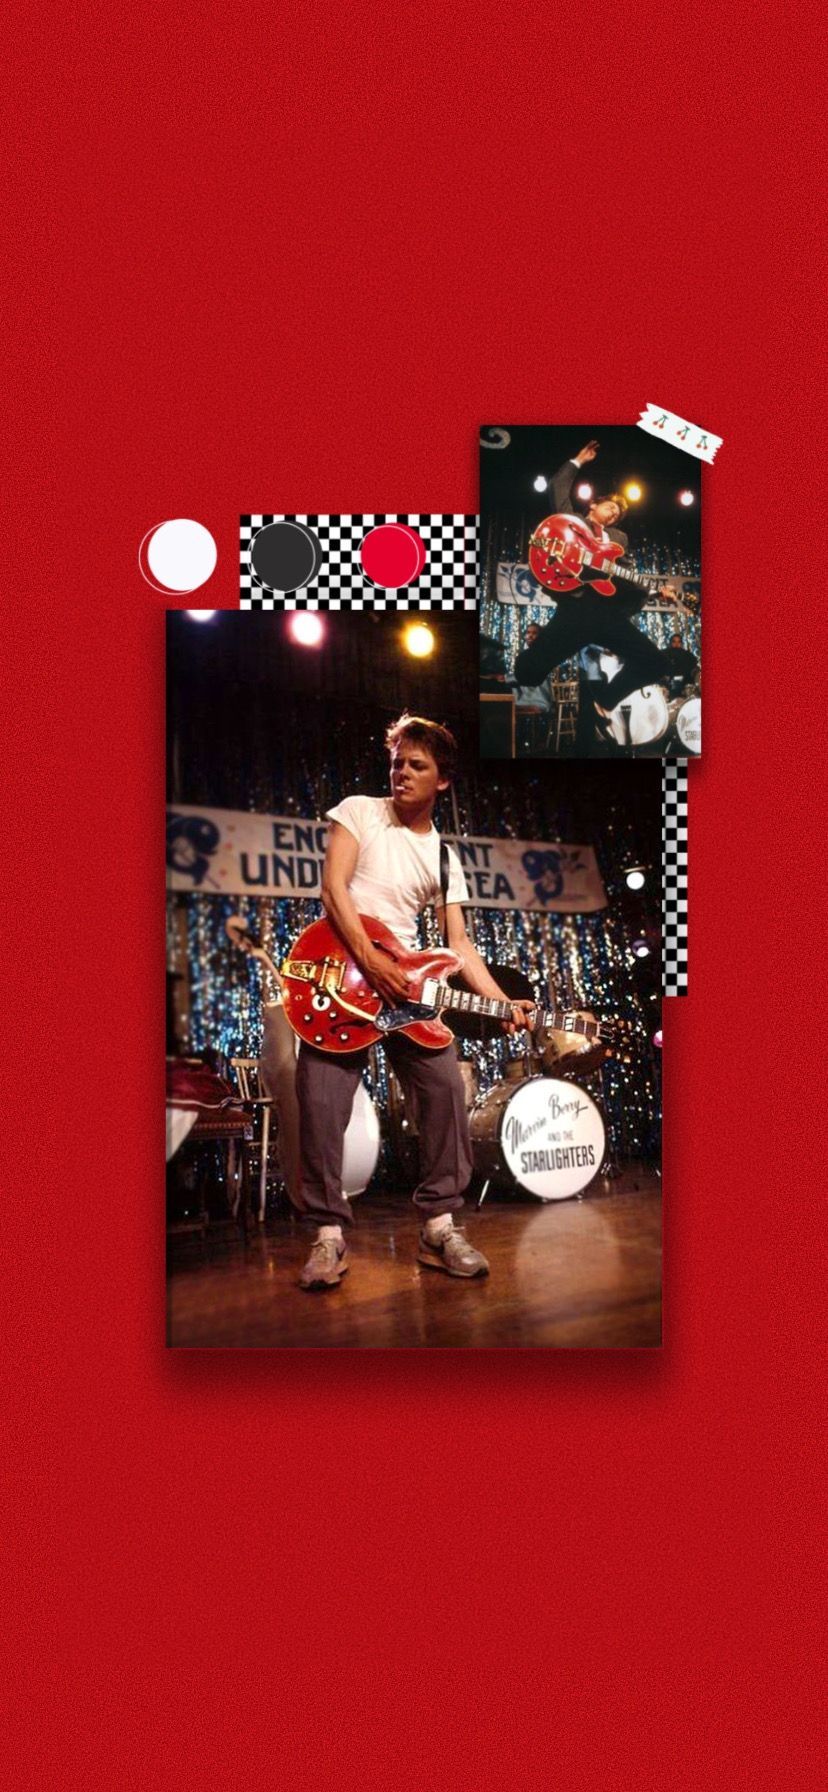 marty mcfly red aesthetic wallpaper 50s. Future wallpaper, Wallpaper, iPhone wallpaper fall